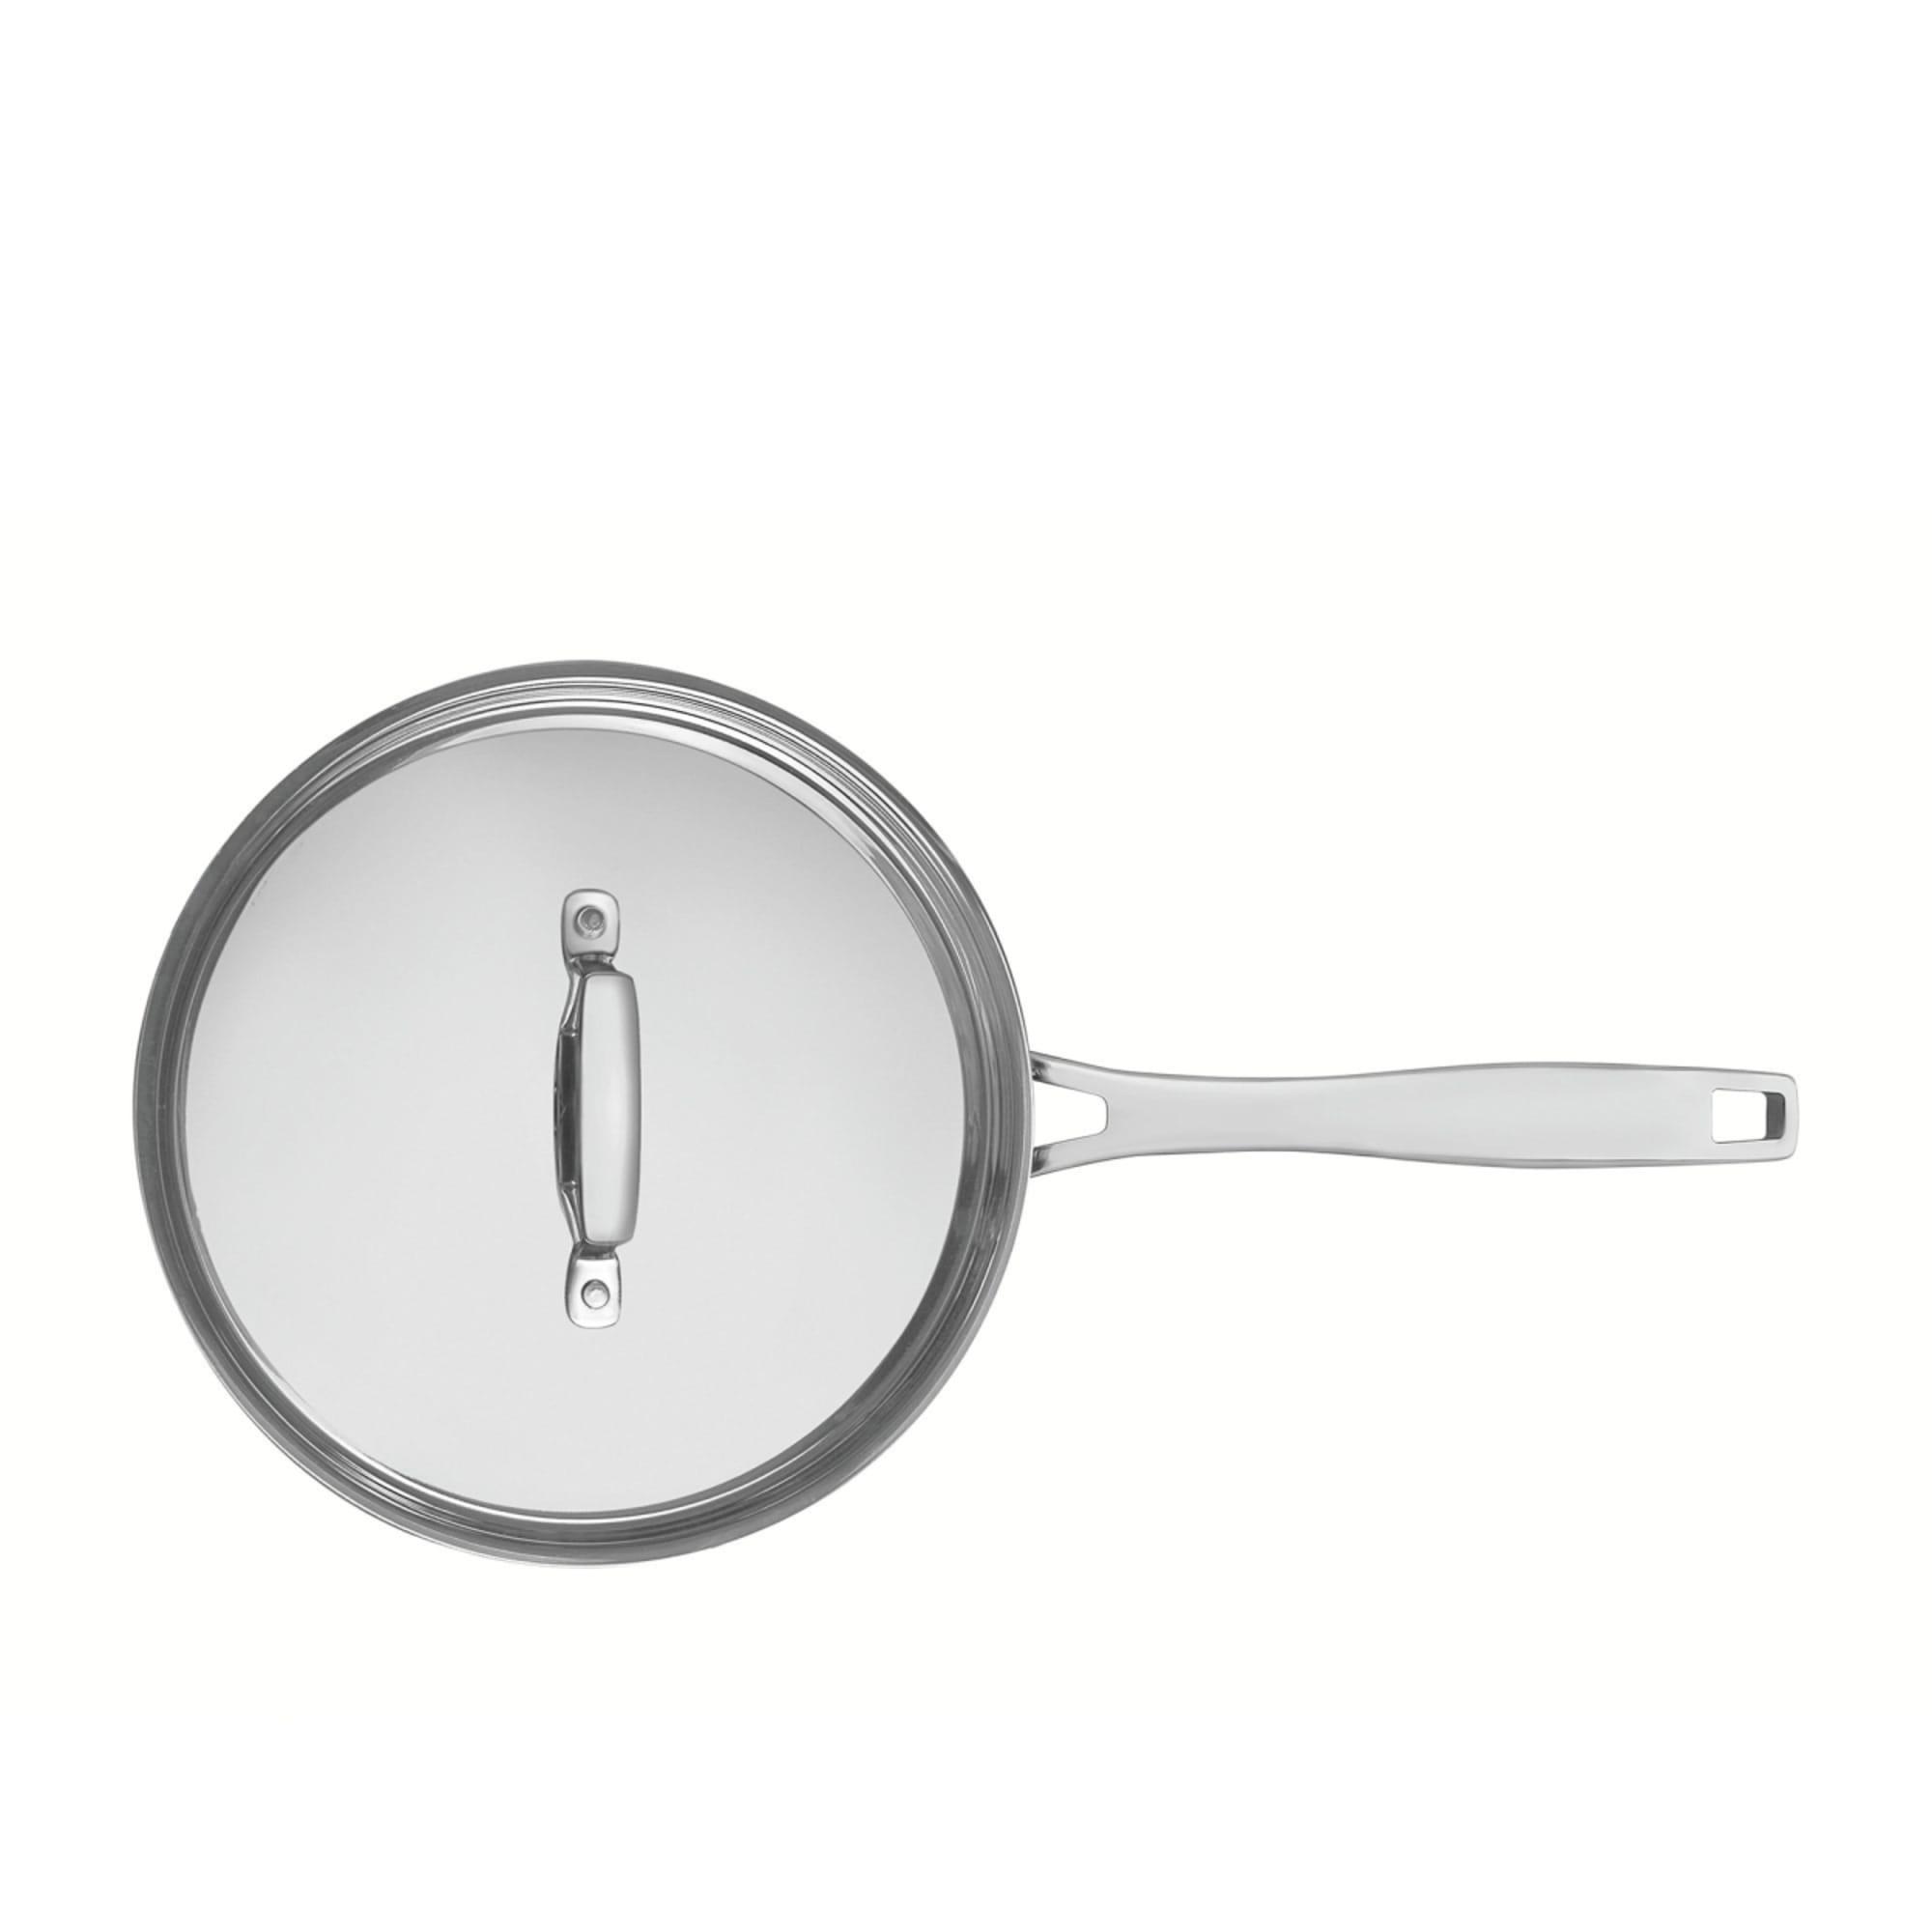 Tramontina Grano Collection Stainless Steel Sauce Pan 30cm - 3.1L Image 4